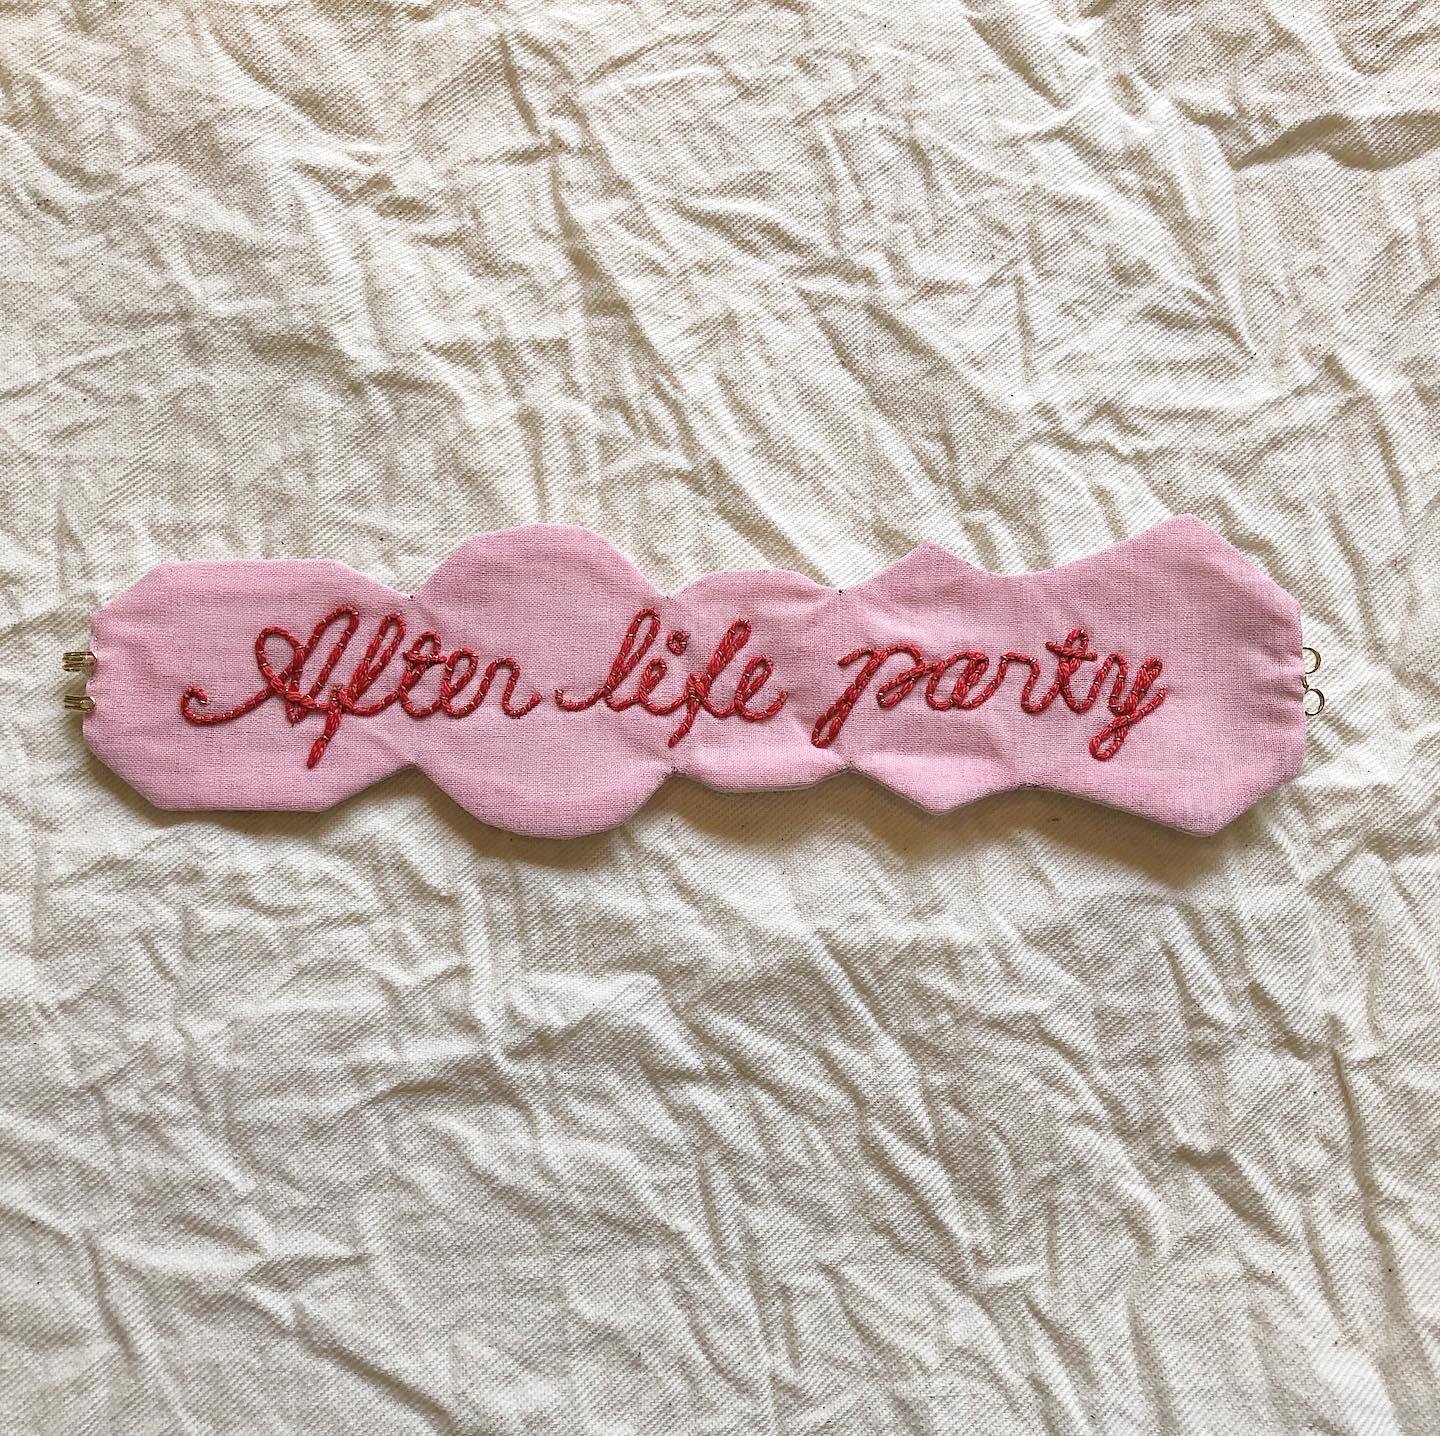 ◆After life party◆　Blacelet 